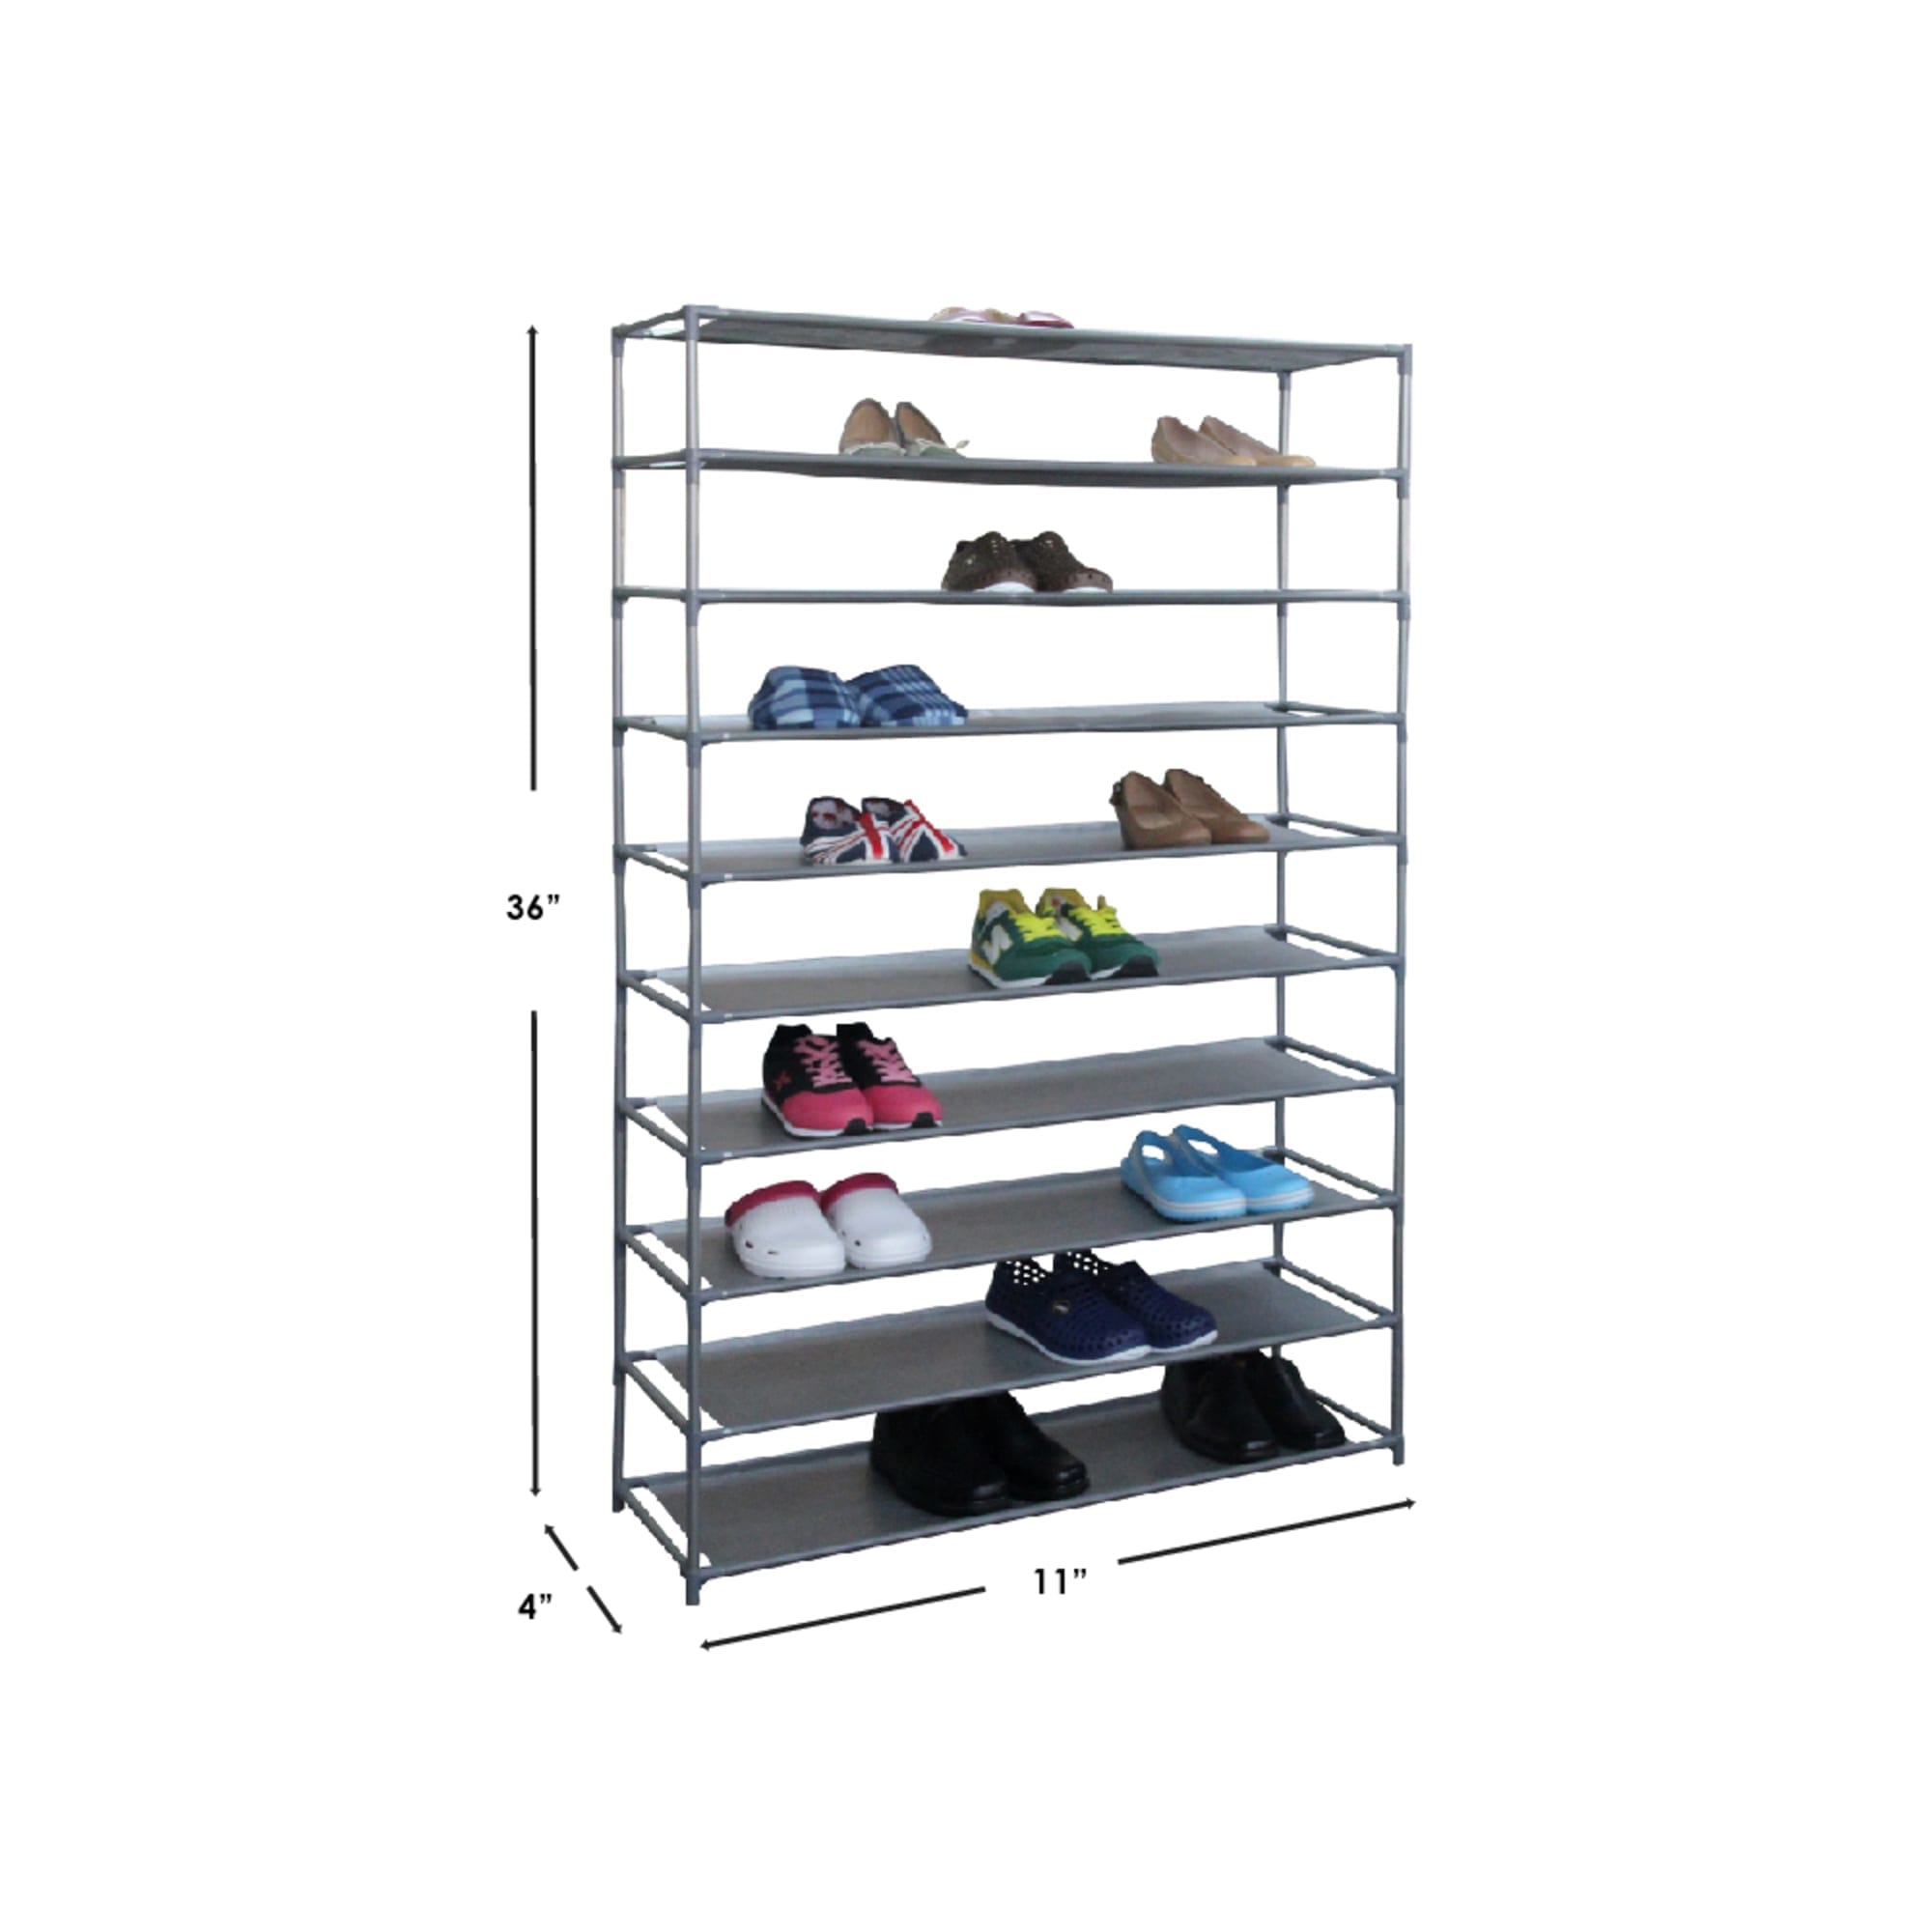 Home Basics 50 Pair Non-Woven Multi-Purpose Stackable Free-Standing Shoe Rack, Grey $25.00 EACH, CASE PACK OF 6